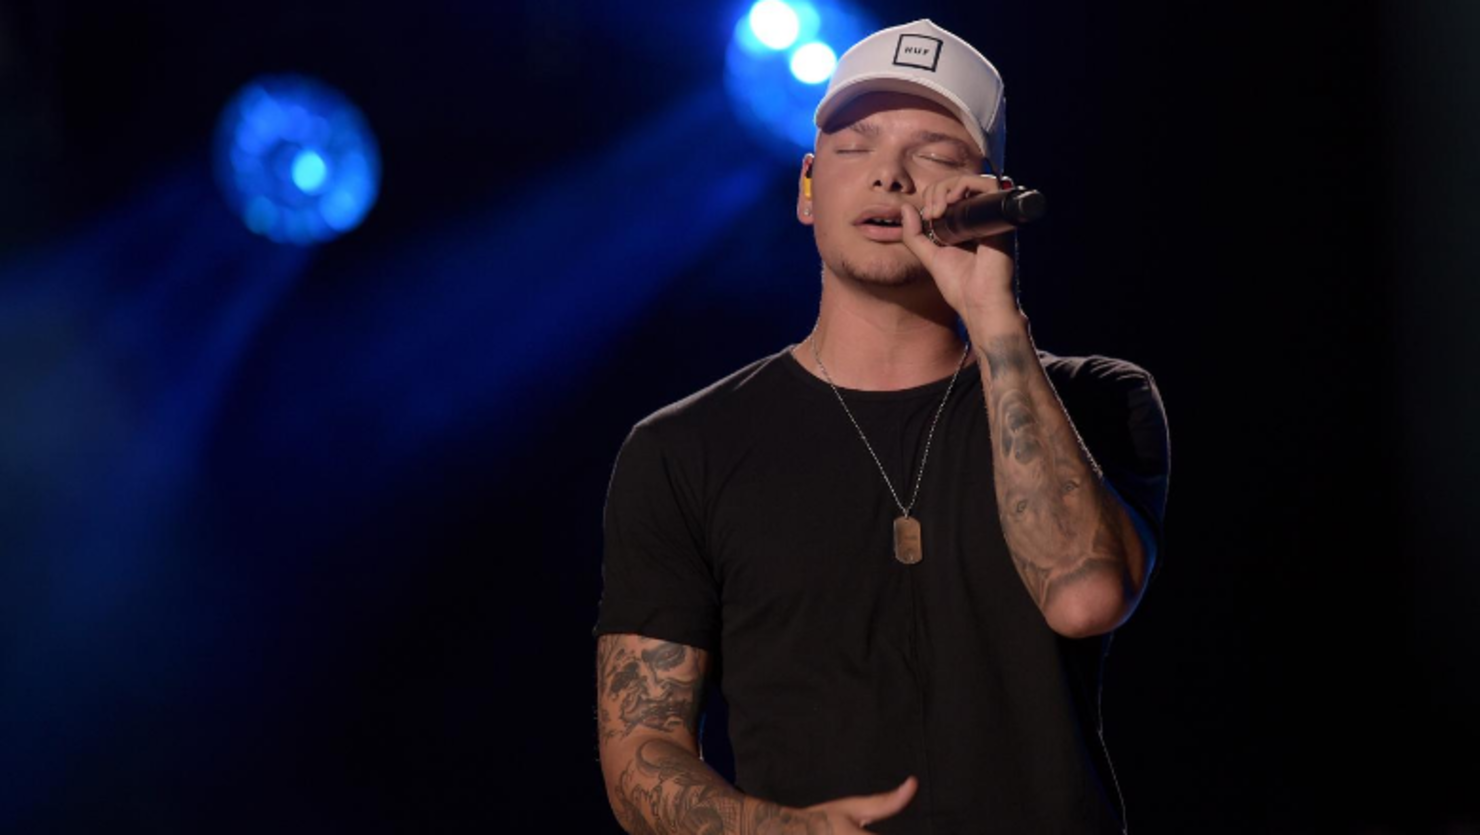 Kane Brown's 'Homesick' Veterans Remix Supports American Heroes